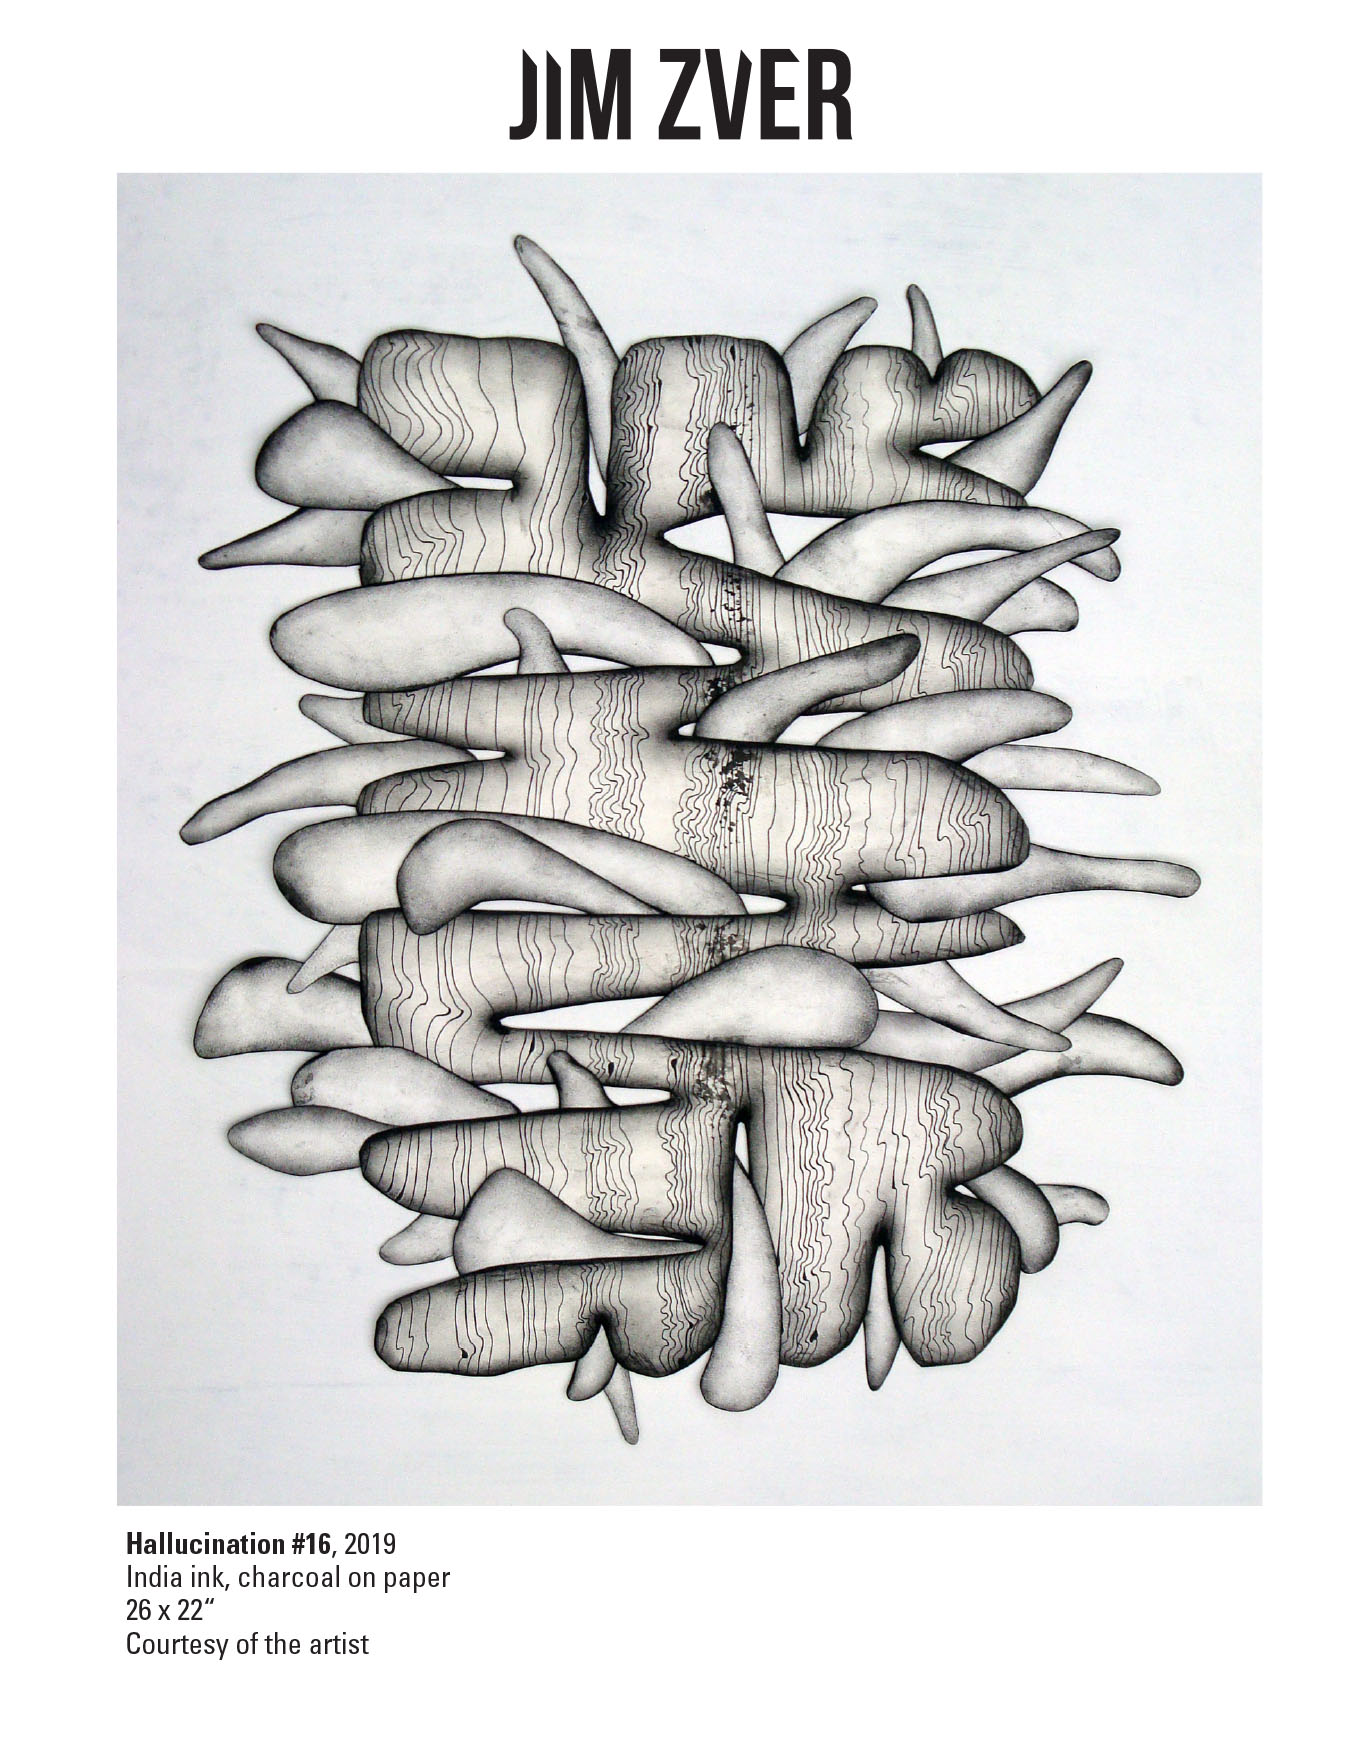 Jim Zver, Hallucination #16, 2019. India ink, charcoal on paper. 26 x 22“ Courtesy of the artist. A ink and chorcoal drawing of organic abstract shapes intertwined with each other.